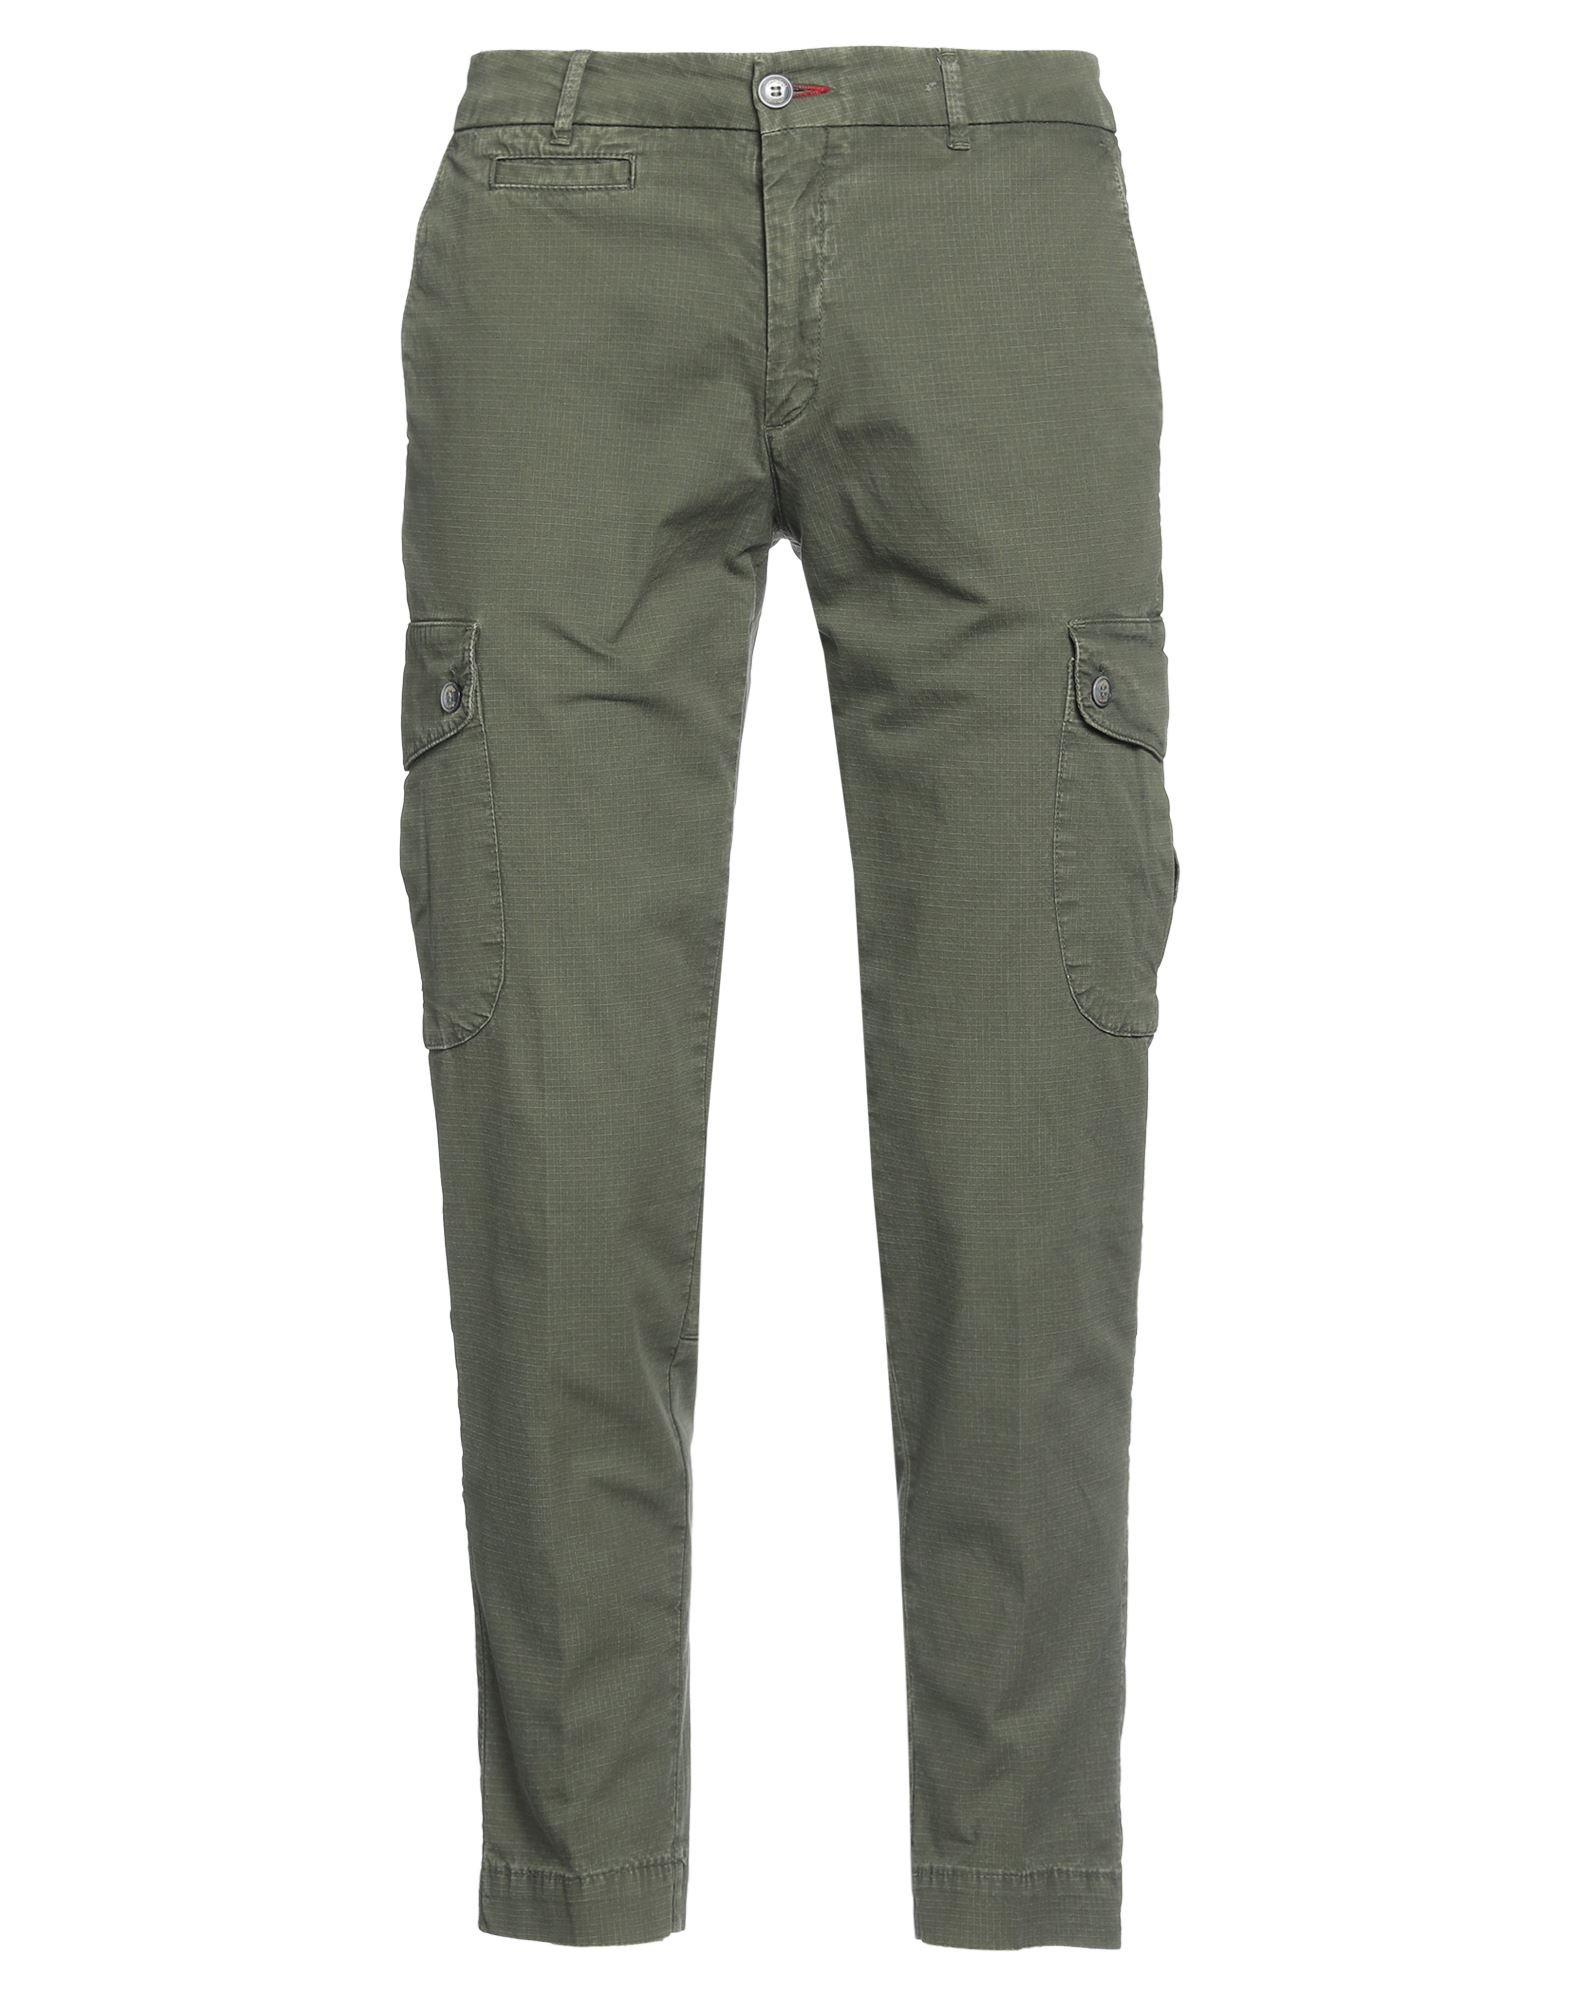 Camouflage Ar And J. Pants In Military Green